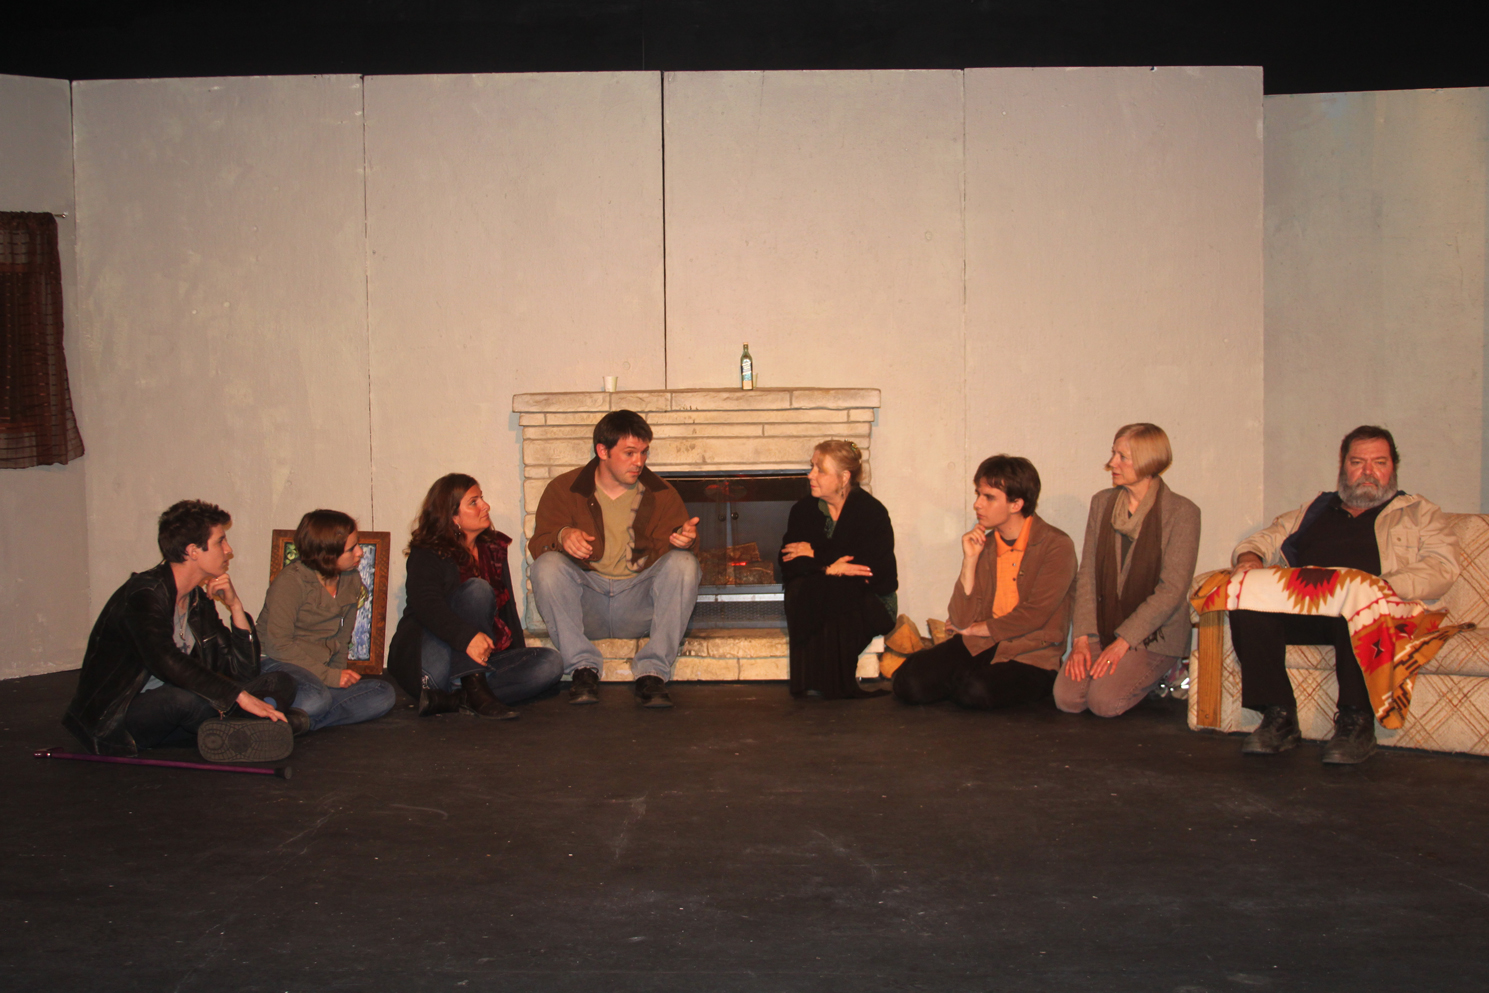 Tom Custer, center, performs a scene from “The Man from Earth” with, from left to right, Rowyn Cunningham, Lindsey Schneider, Amy Reedy, Custer, Linda Ellsworth, Matthew Myer, Nancy Chastain and Peter Norton. “The Man from Earth” ended its run last week. “Remembering Kathy” opens Friday.-Photo by Shannon Reid